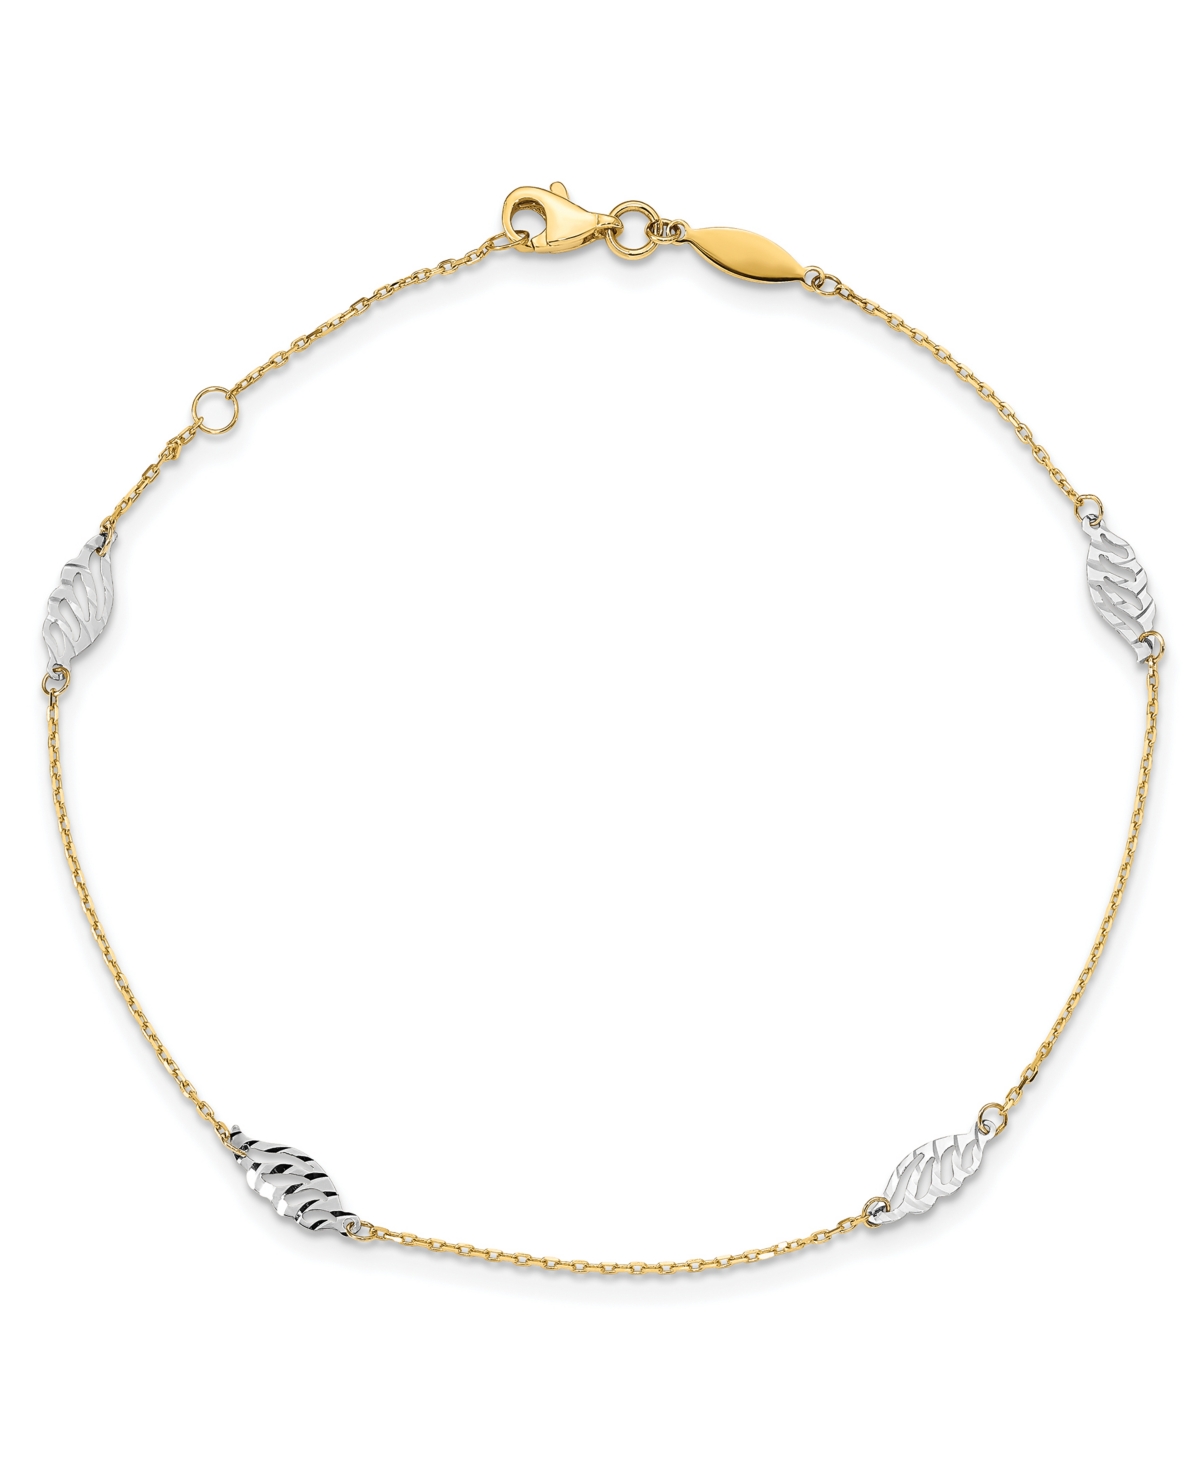 MACY'S POLISHED LEAF ANKLET IN 14K YELLOW AND WHITE GOLD